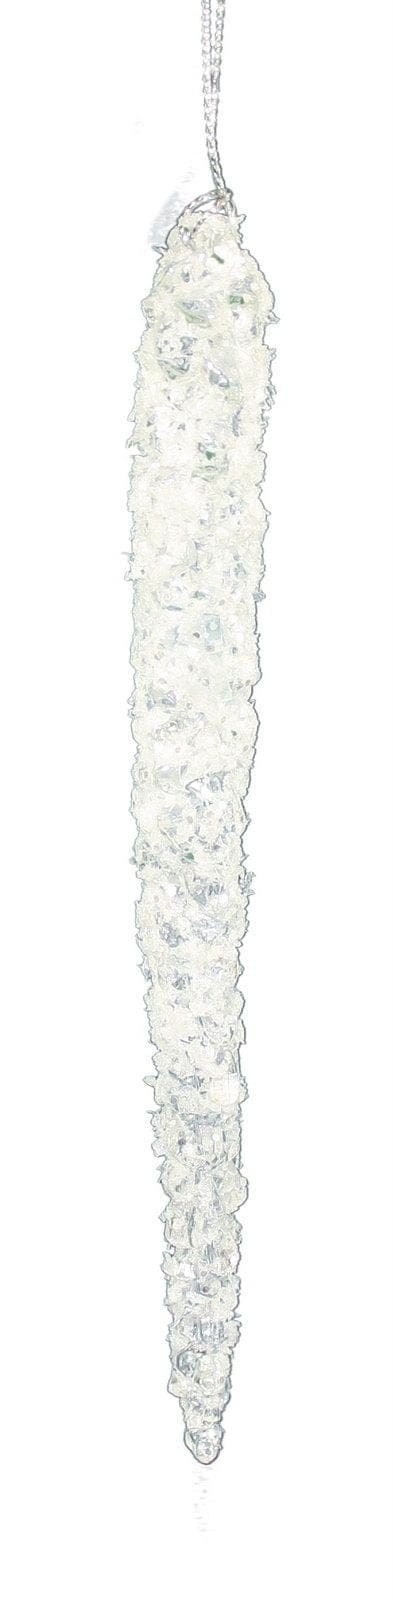 6.5 inch Acrylic Icicle Ornament - Full Frost - Shelburne Country Store